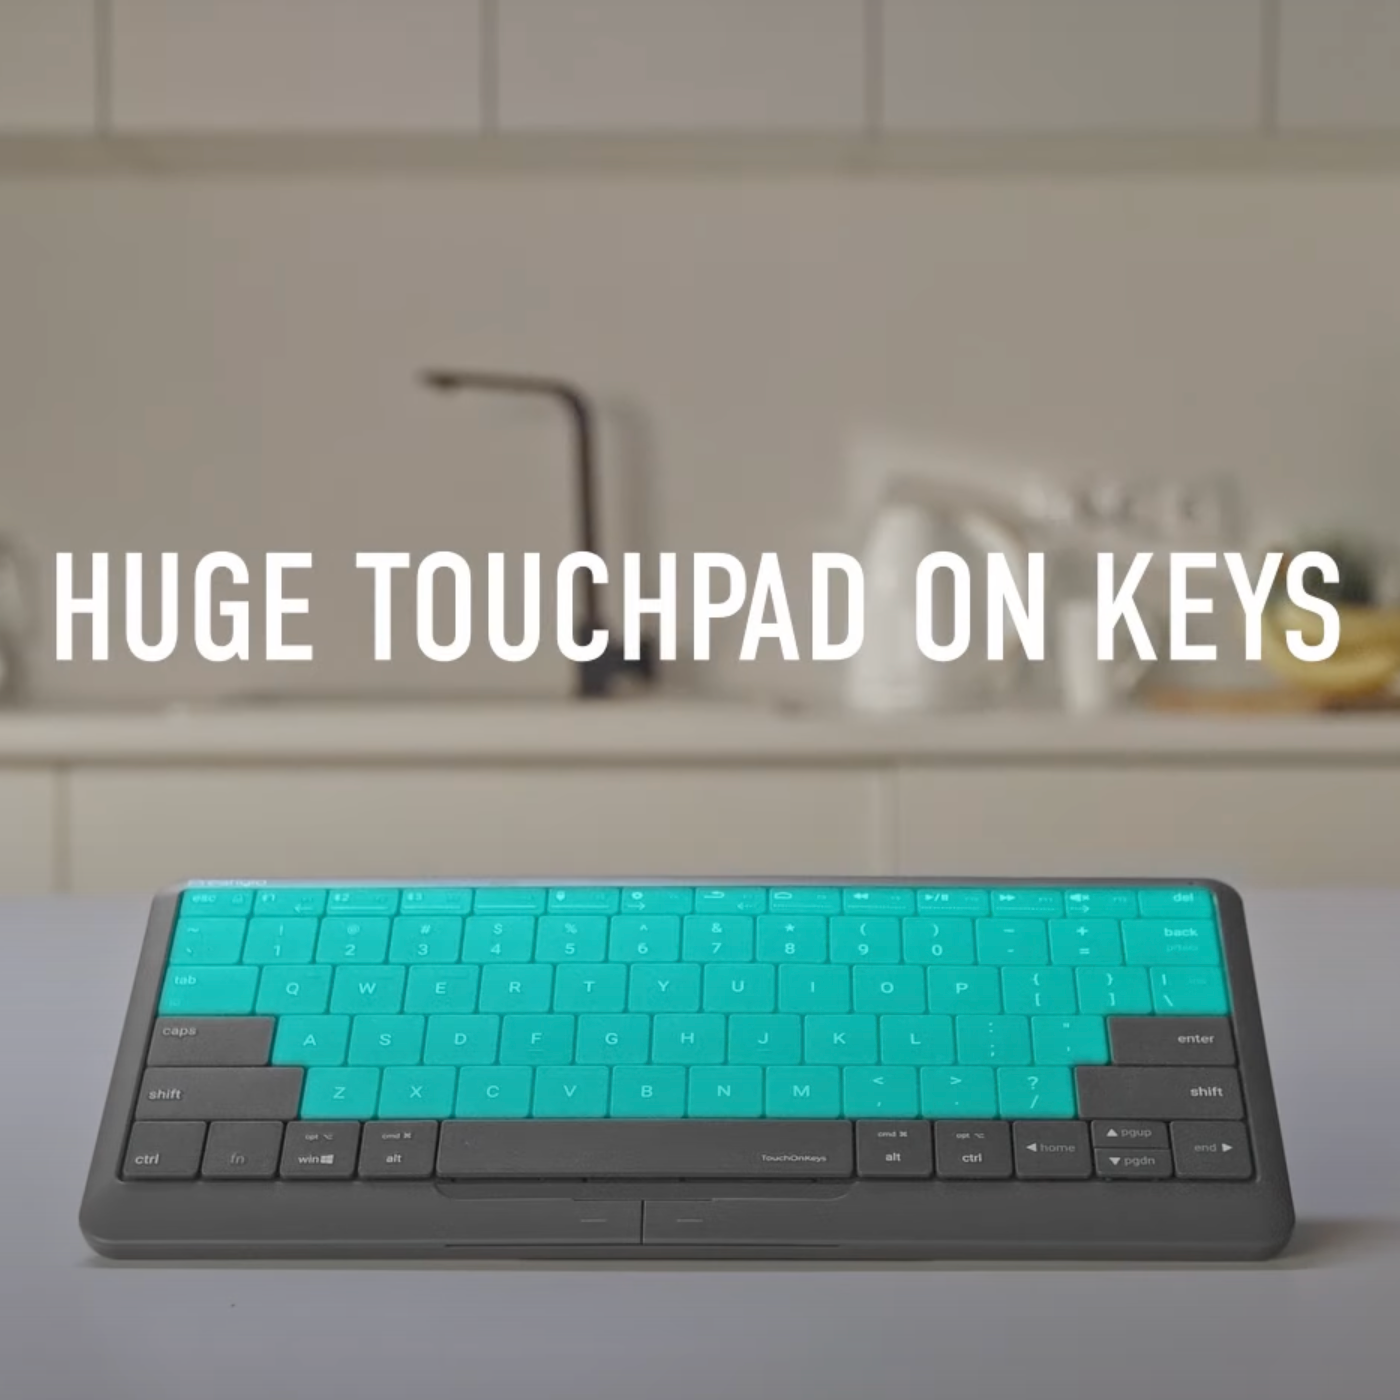 CLICK&TOUCH 2 - Invisible touchpad on Keys - Storming Gravity